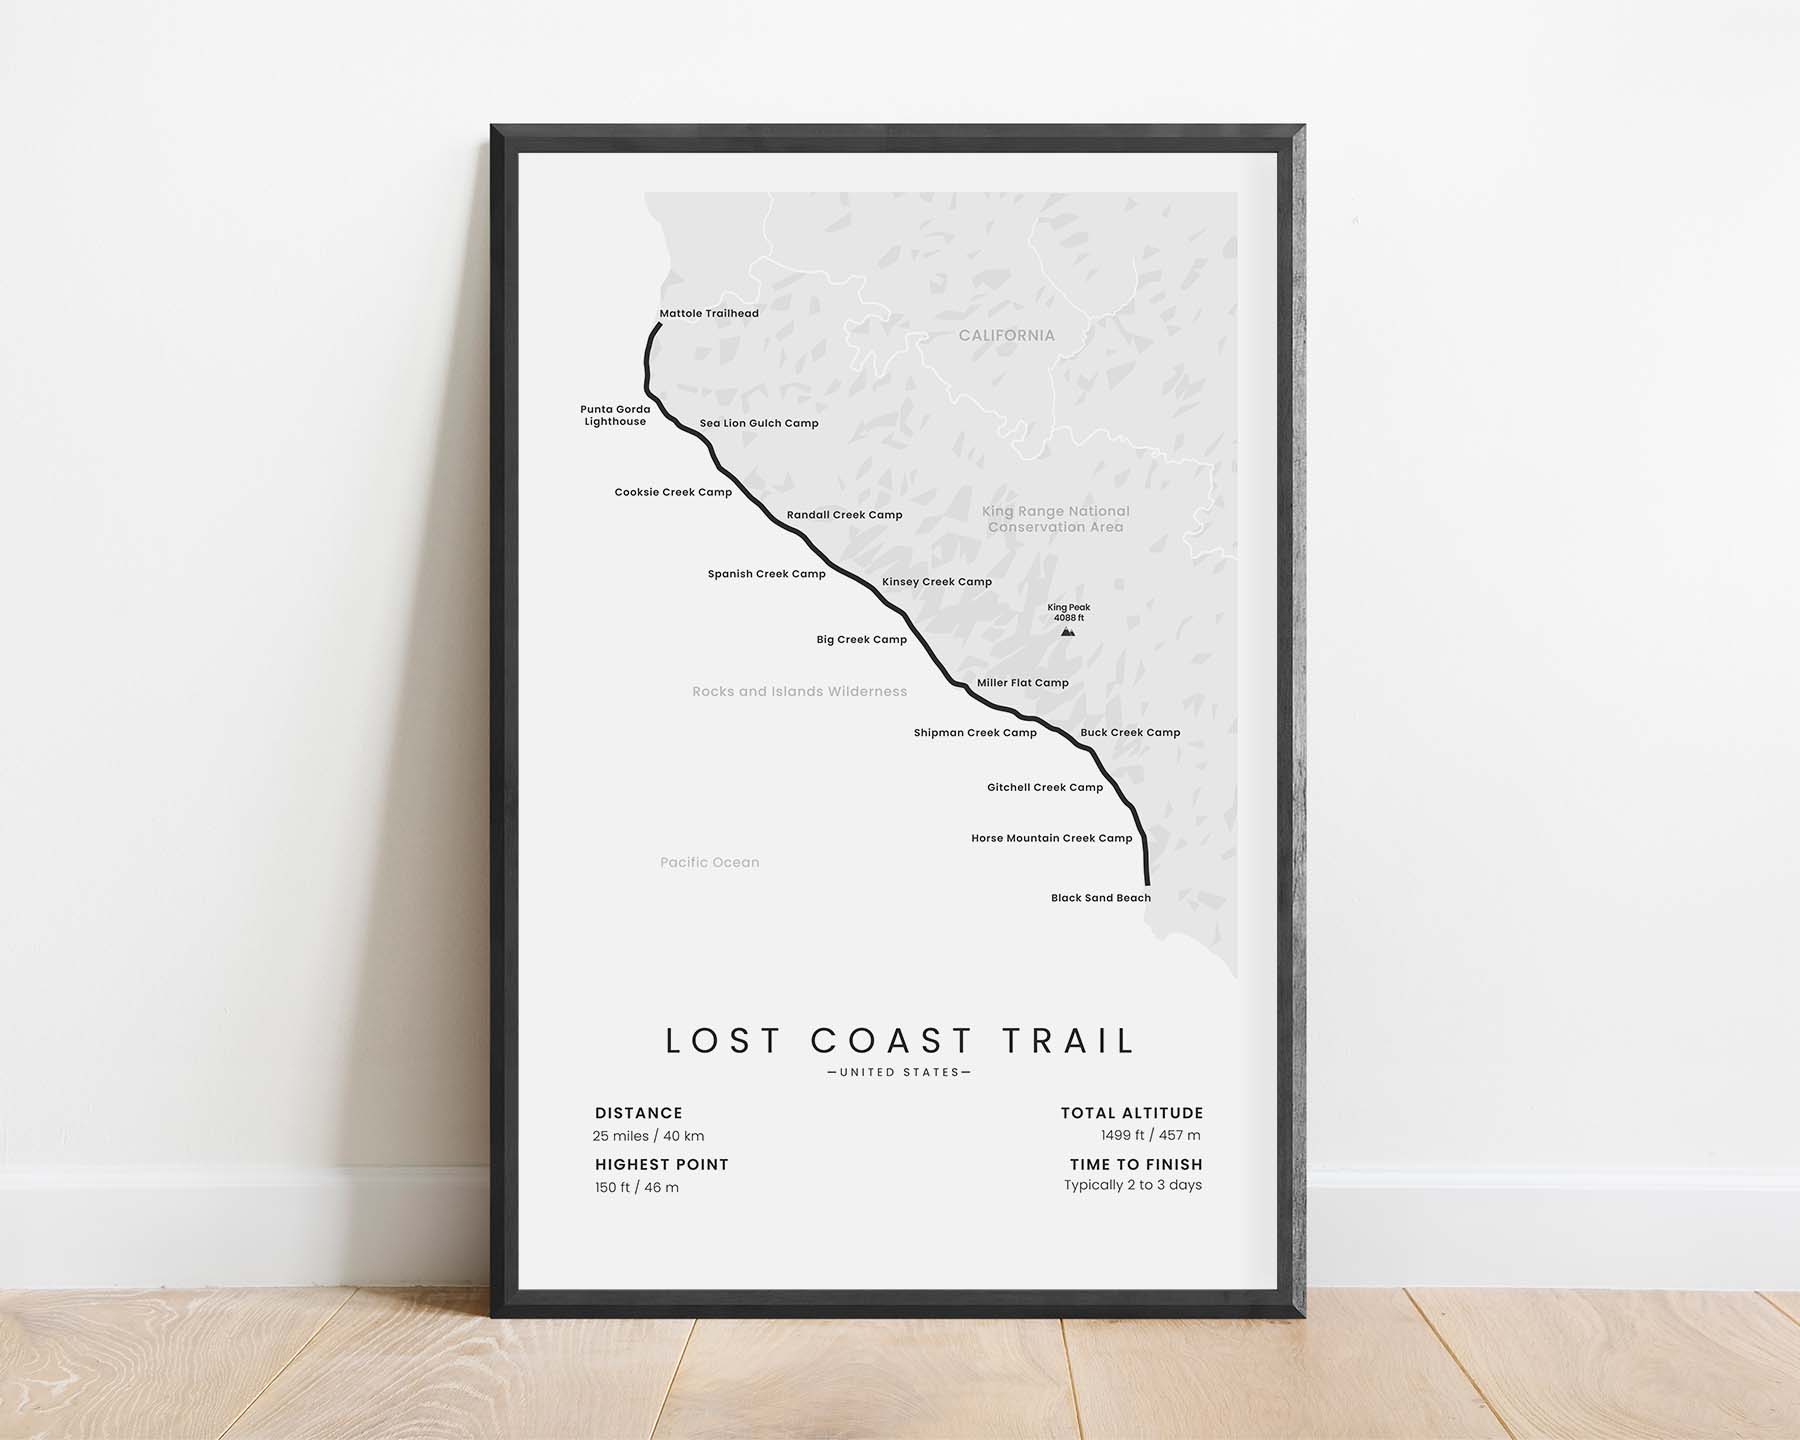 Lost Coast Trail (Mattole to Black Sand Beach, California, King Range Conservation Area, United States) Trek Poster with White Background